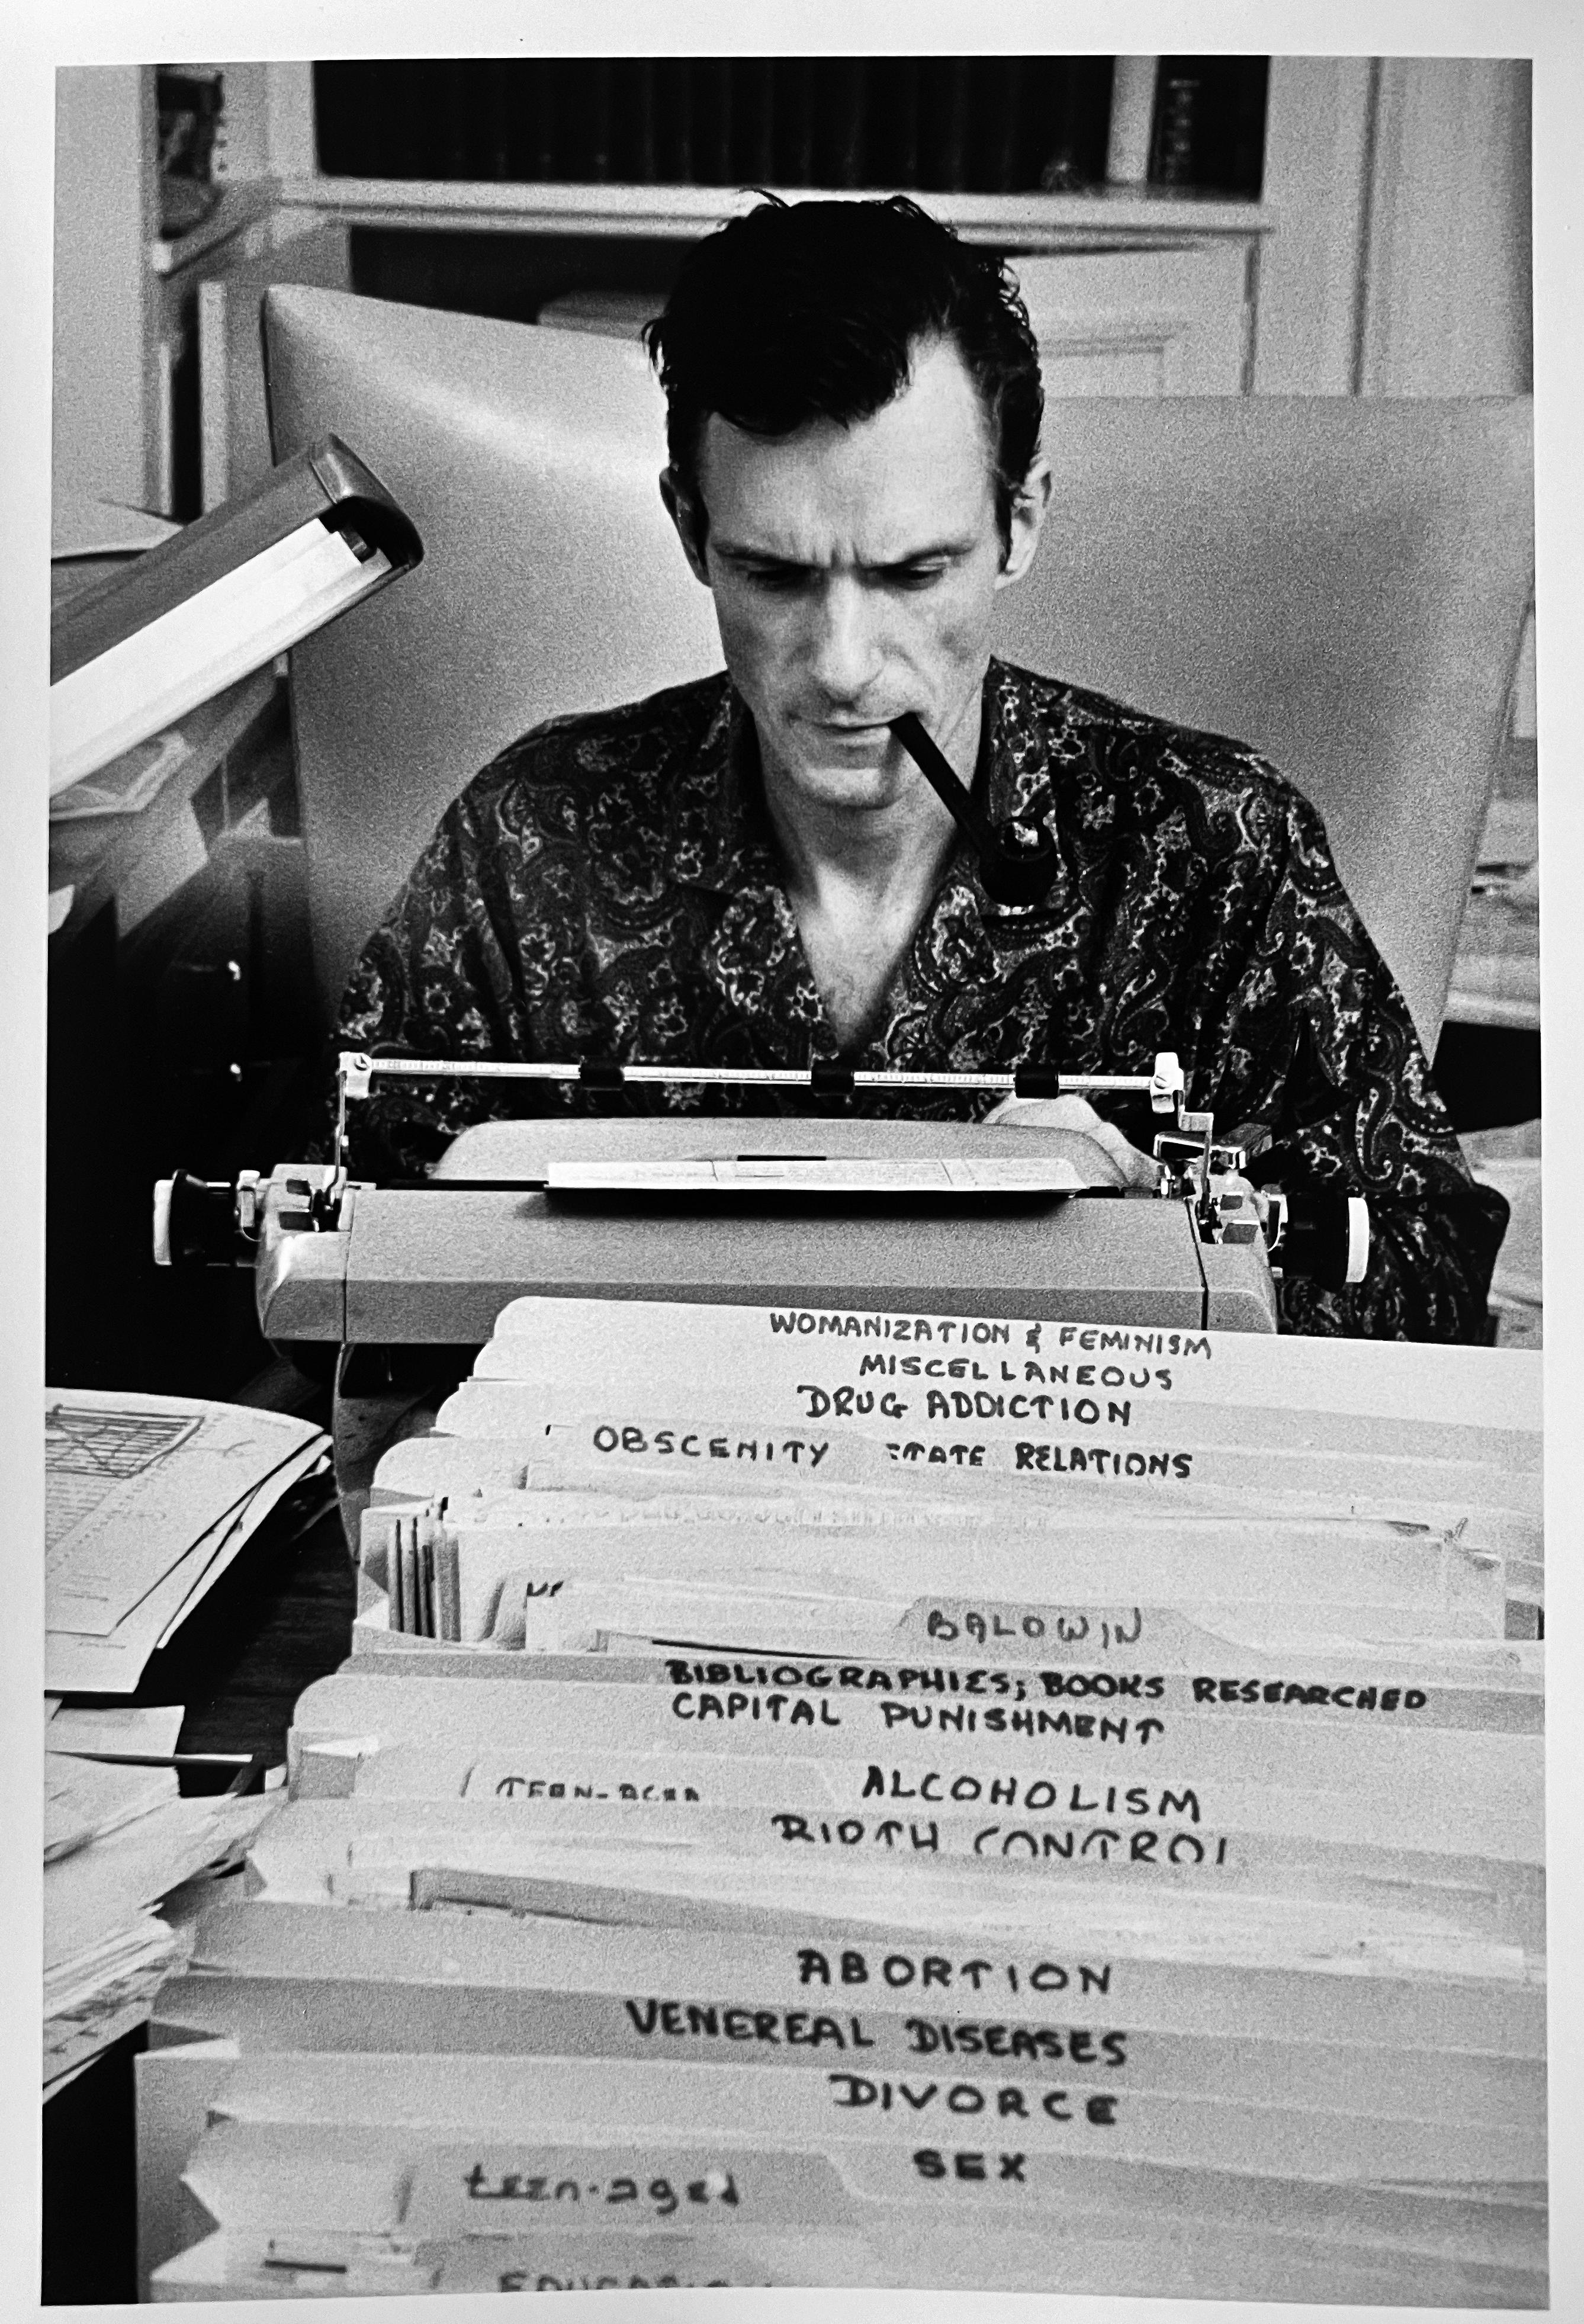 By American photographer Burt Glinn a black-and-white 14" x 11" photograph on fiber paper (gelatin silver print) of Editor-in-chief Hugh Hefner who wrote for the magazine he founded, Playboy. An historical photo of Hefner smoking a pipe at his desk